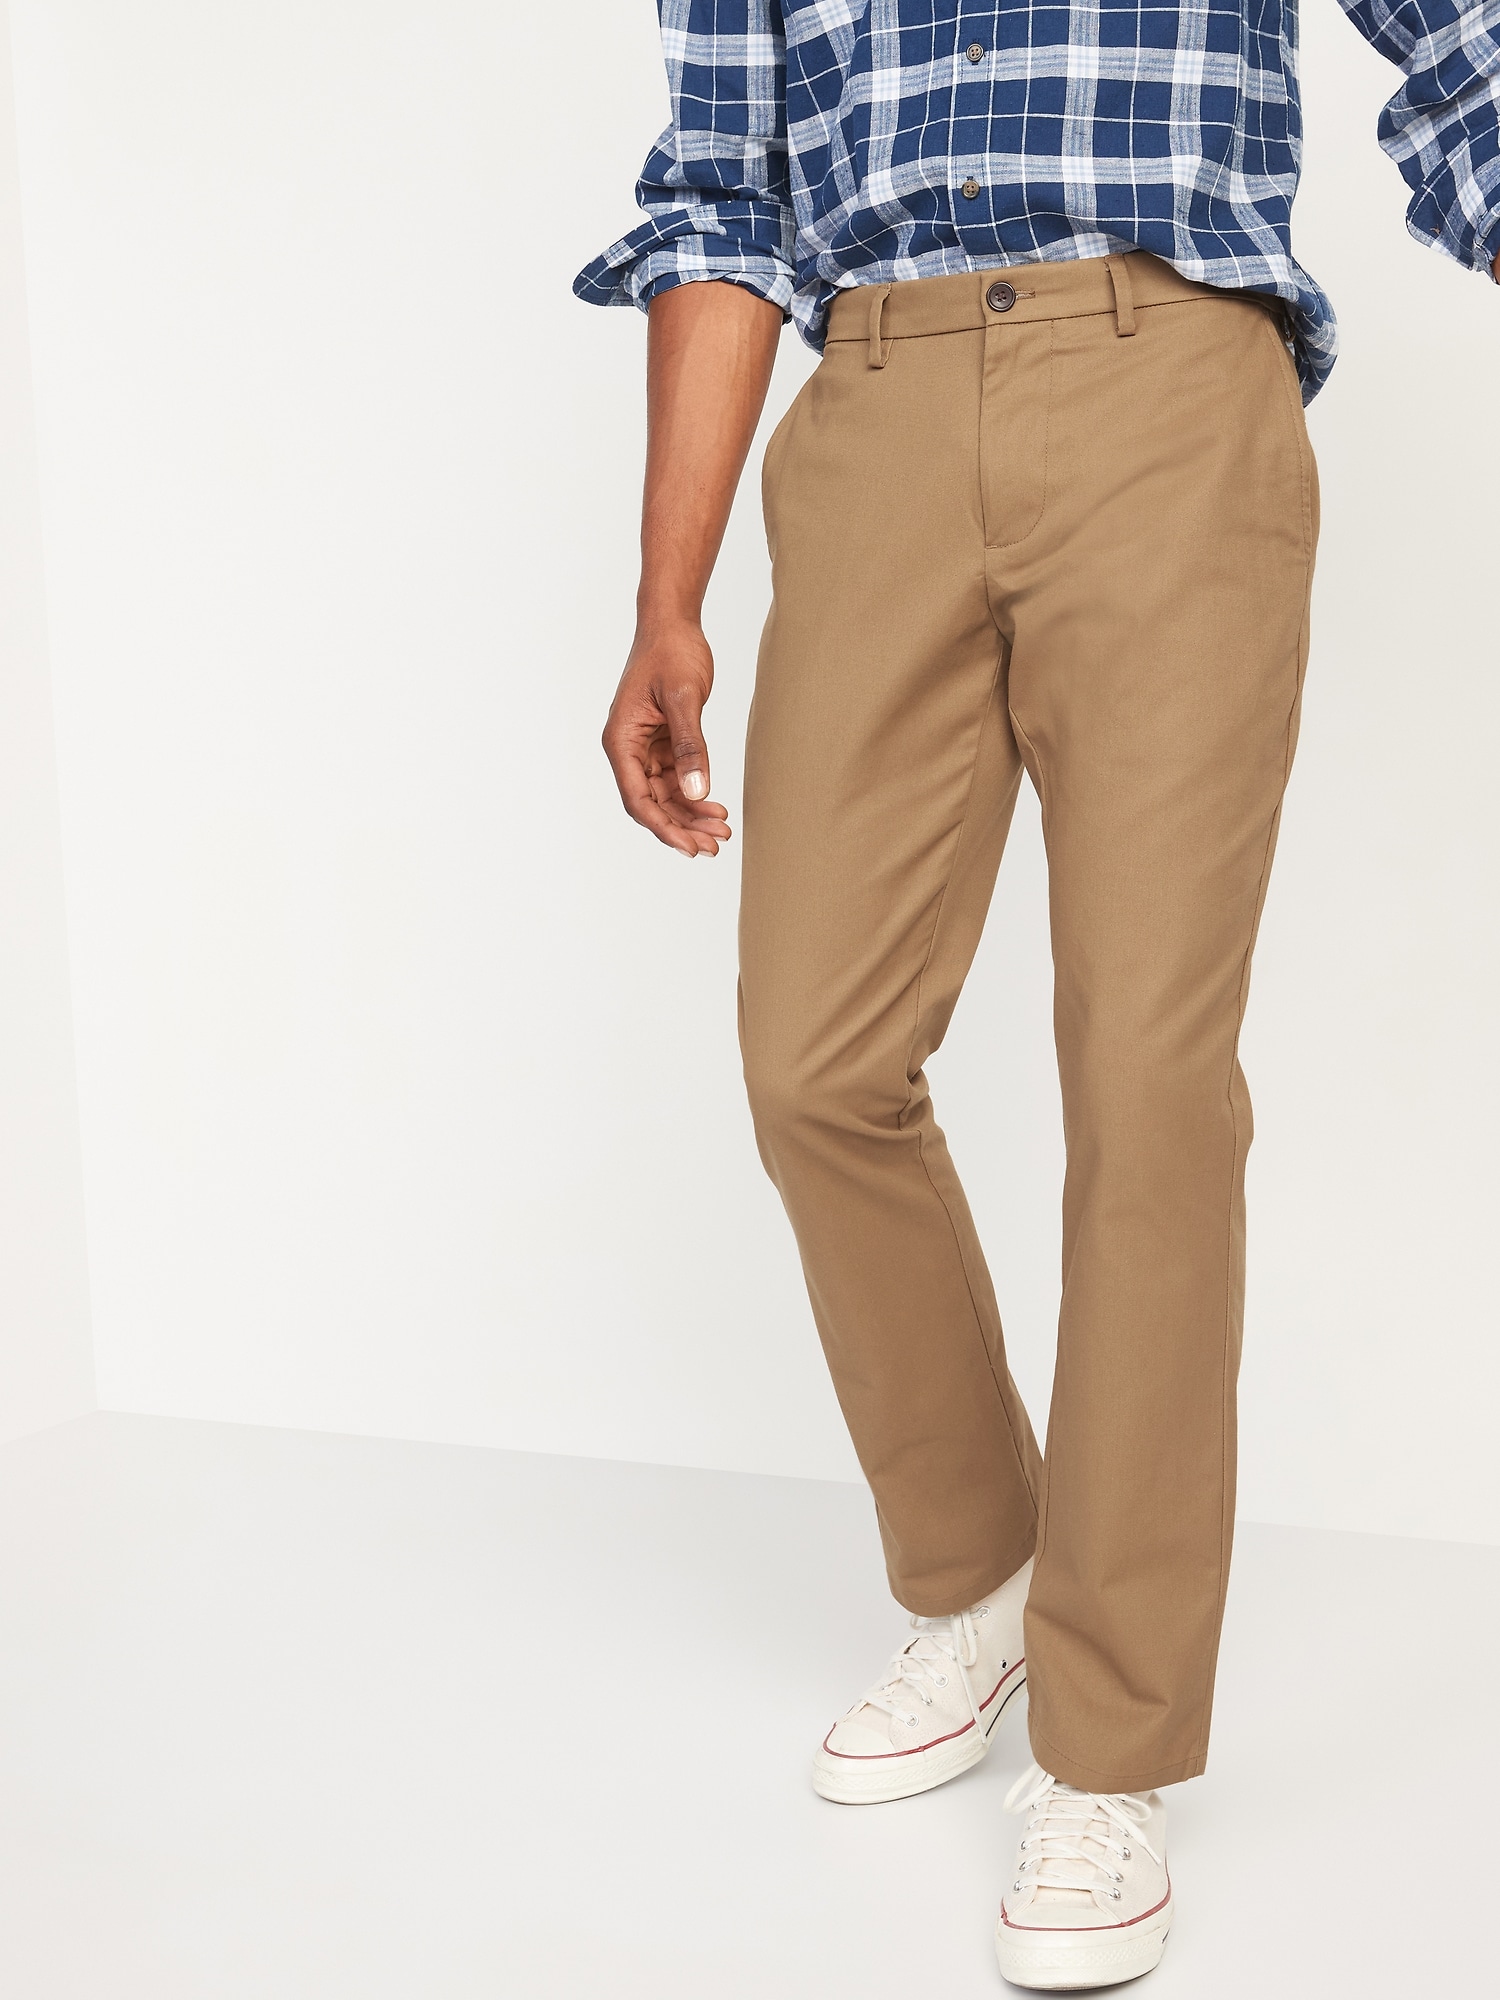 chinos pants for men